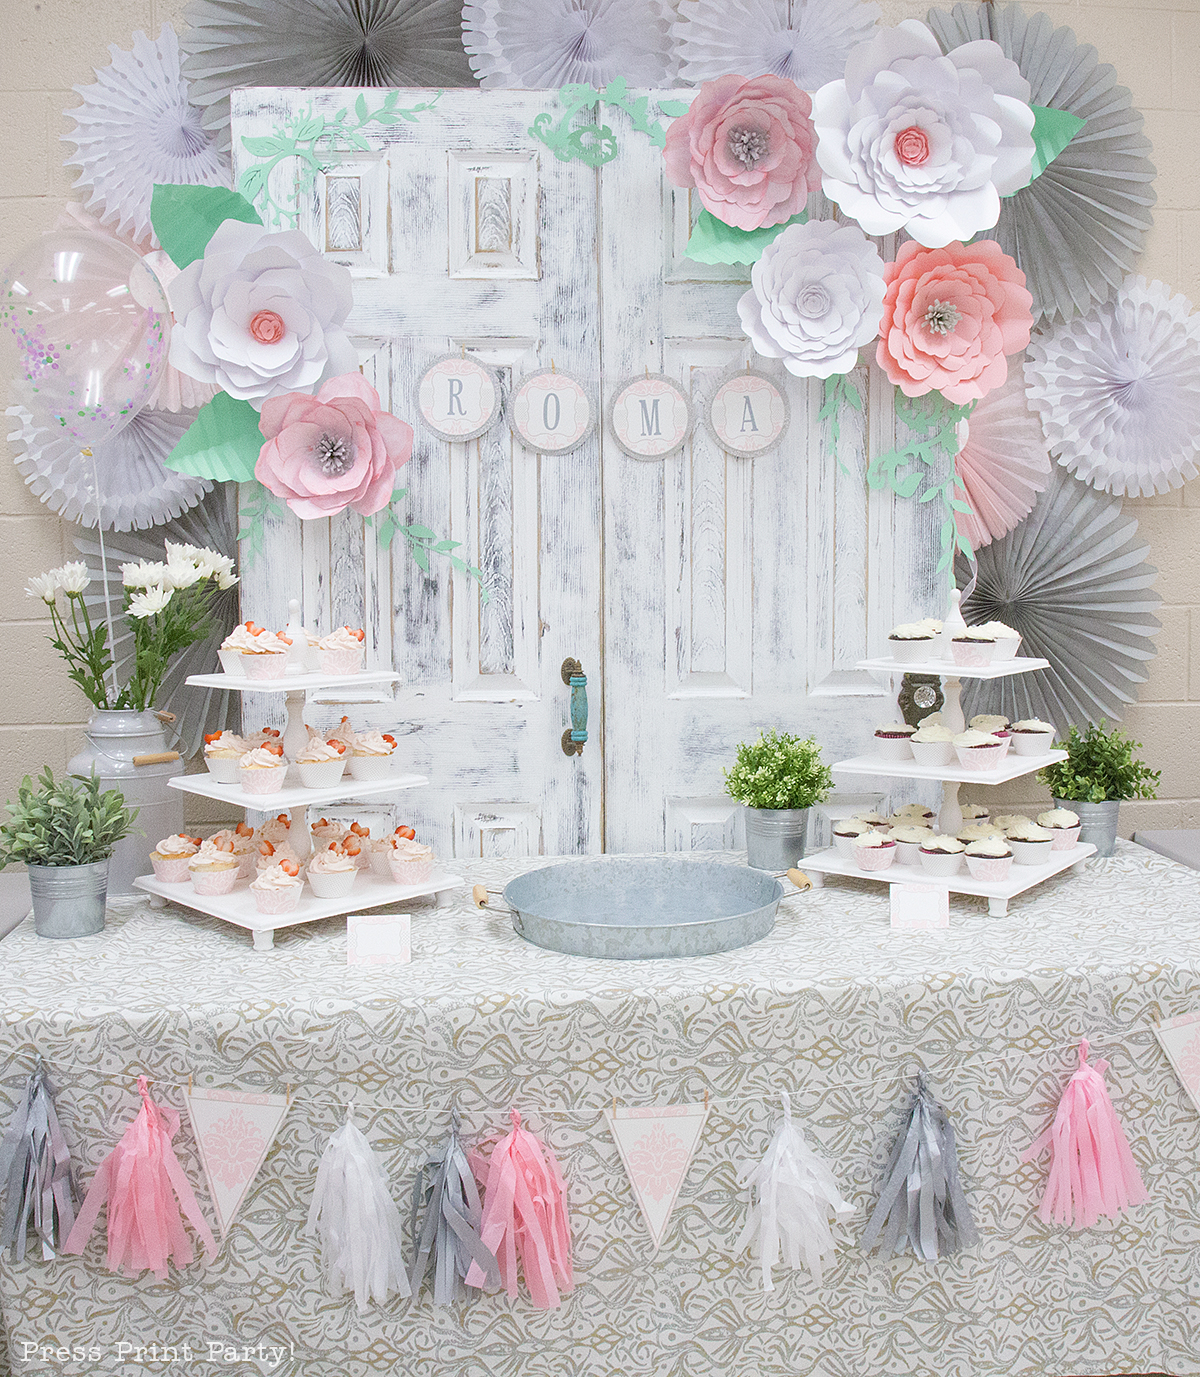 Sweet Vintage Baby Shower Decorations - By Press Print Party!